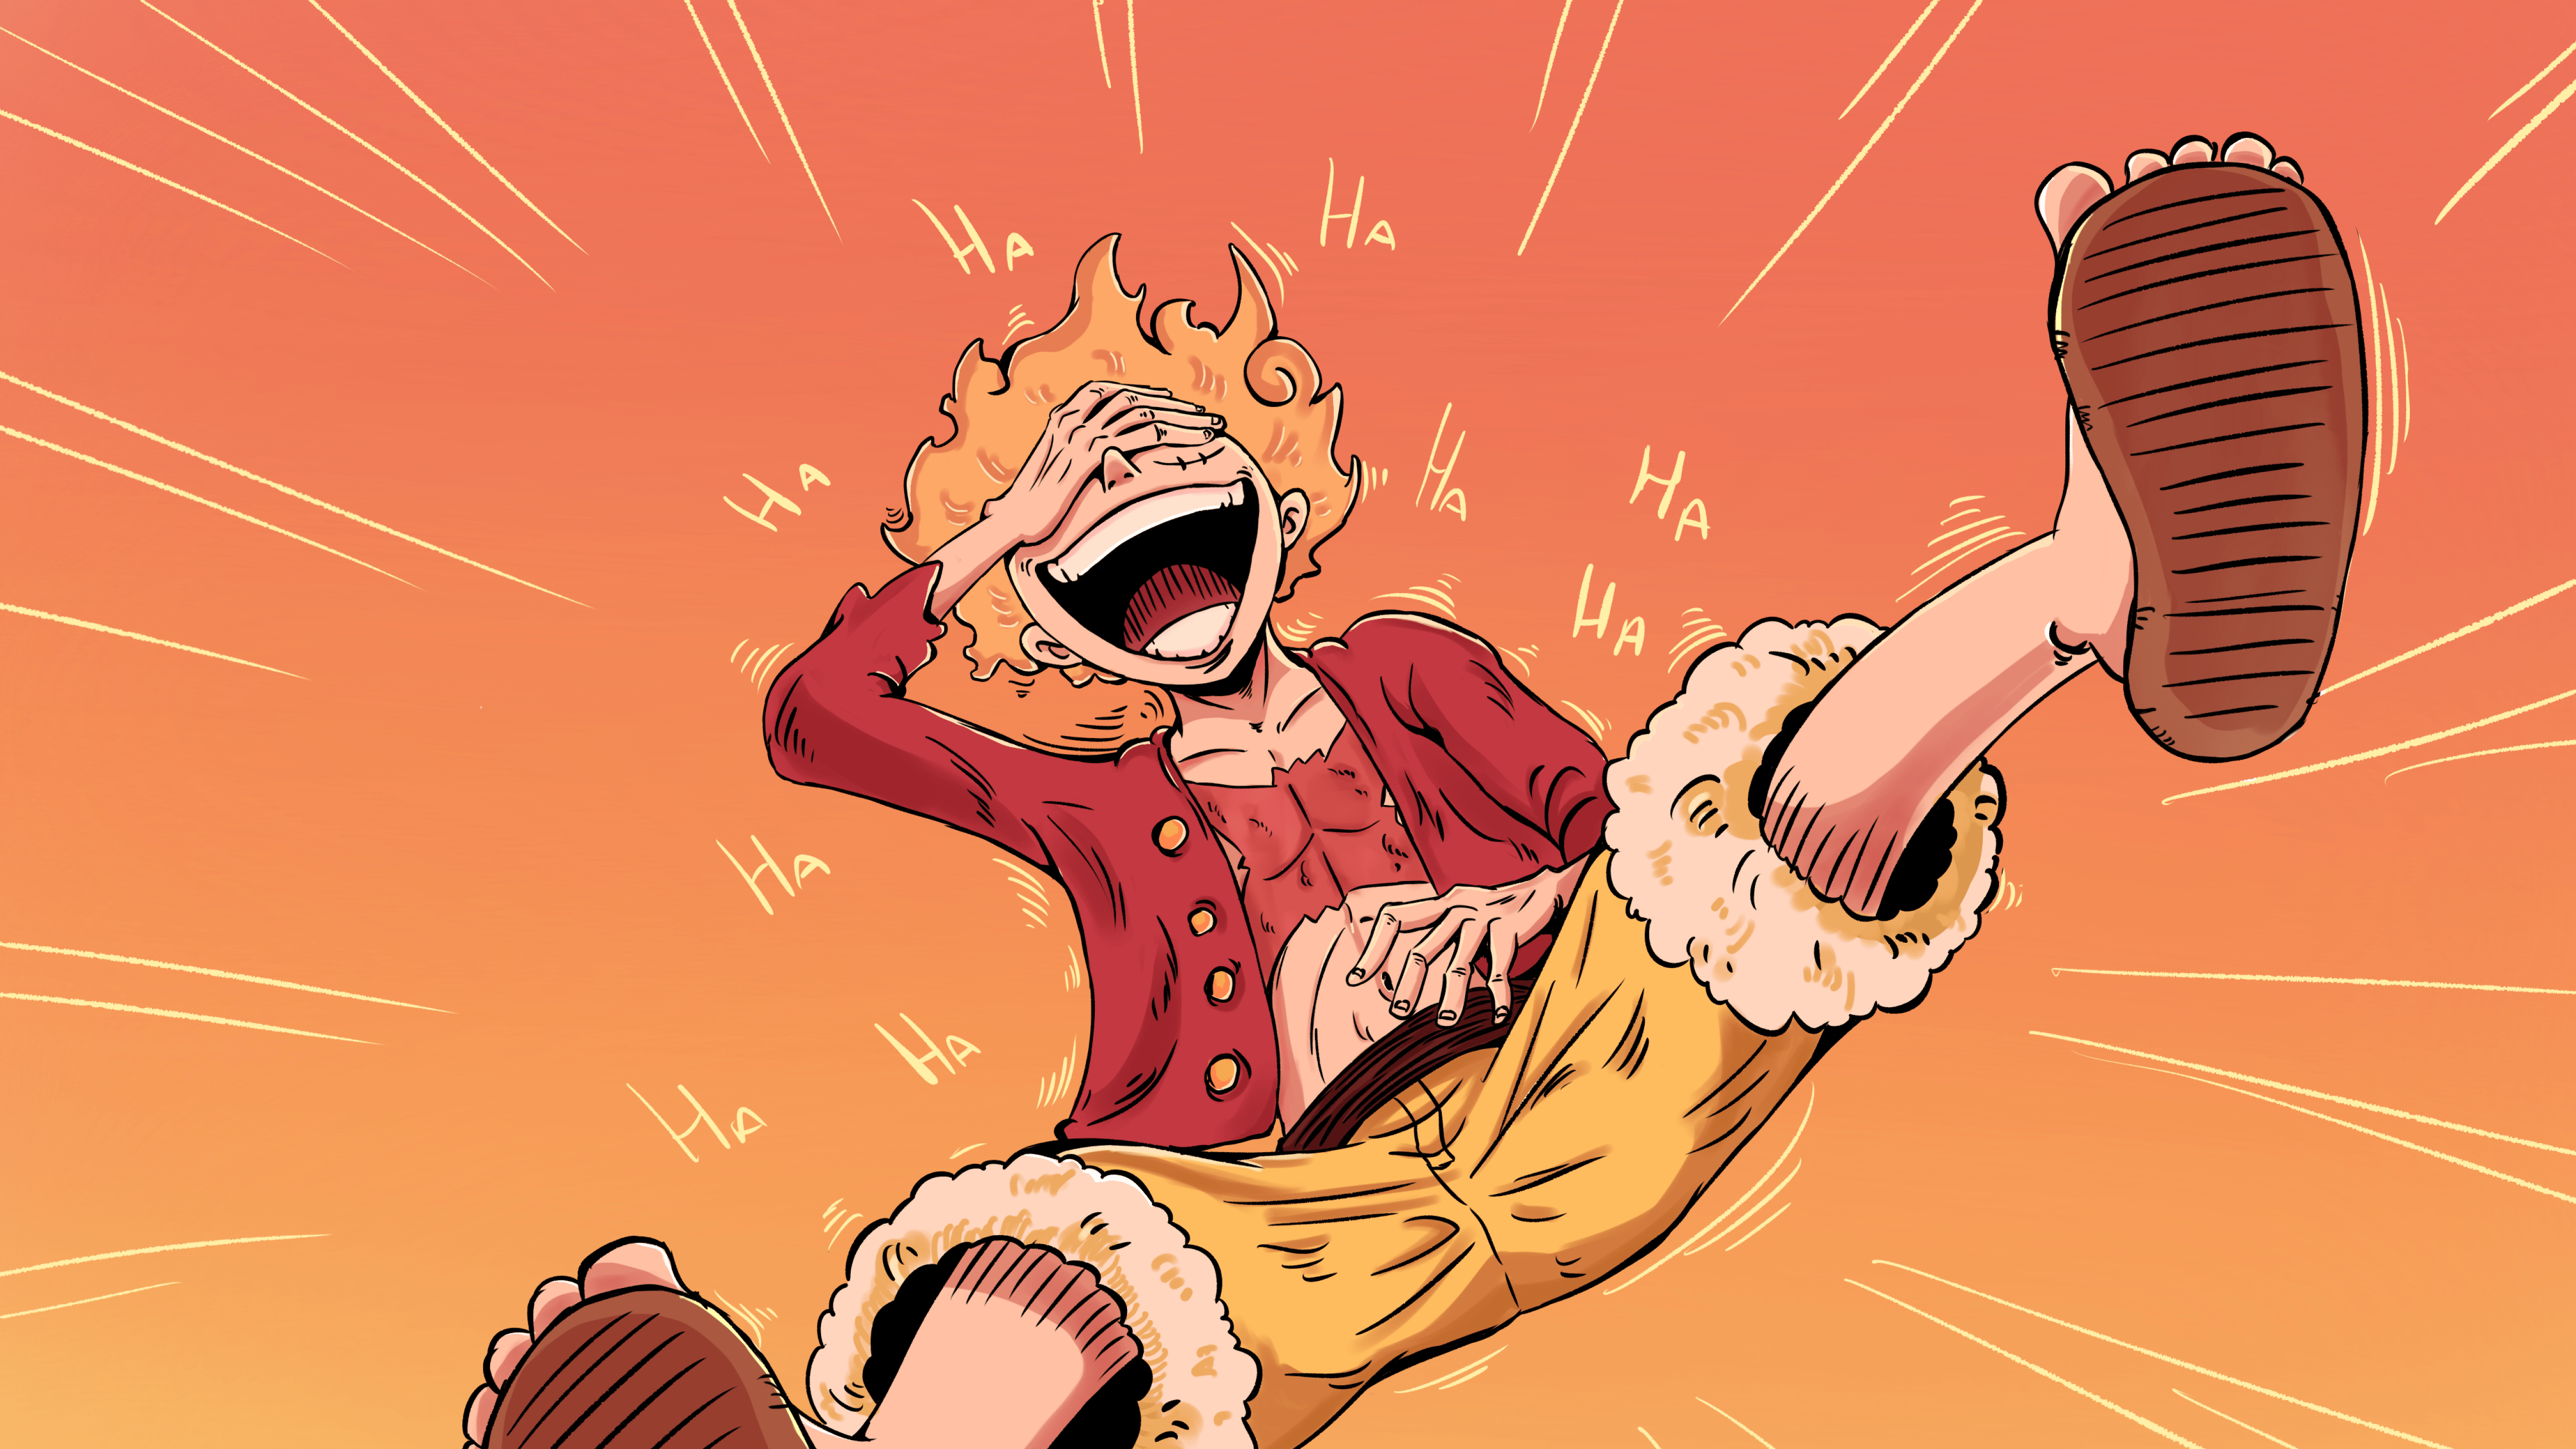 Luffy laughing and kicking his leg up in the air. - One Piece